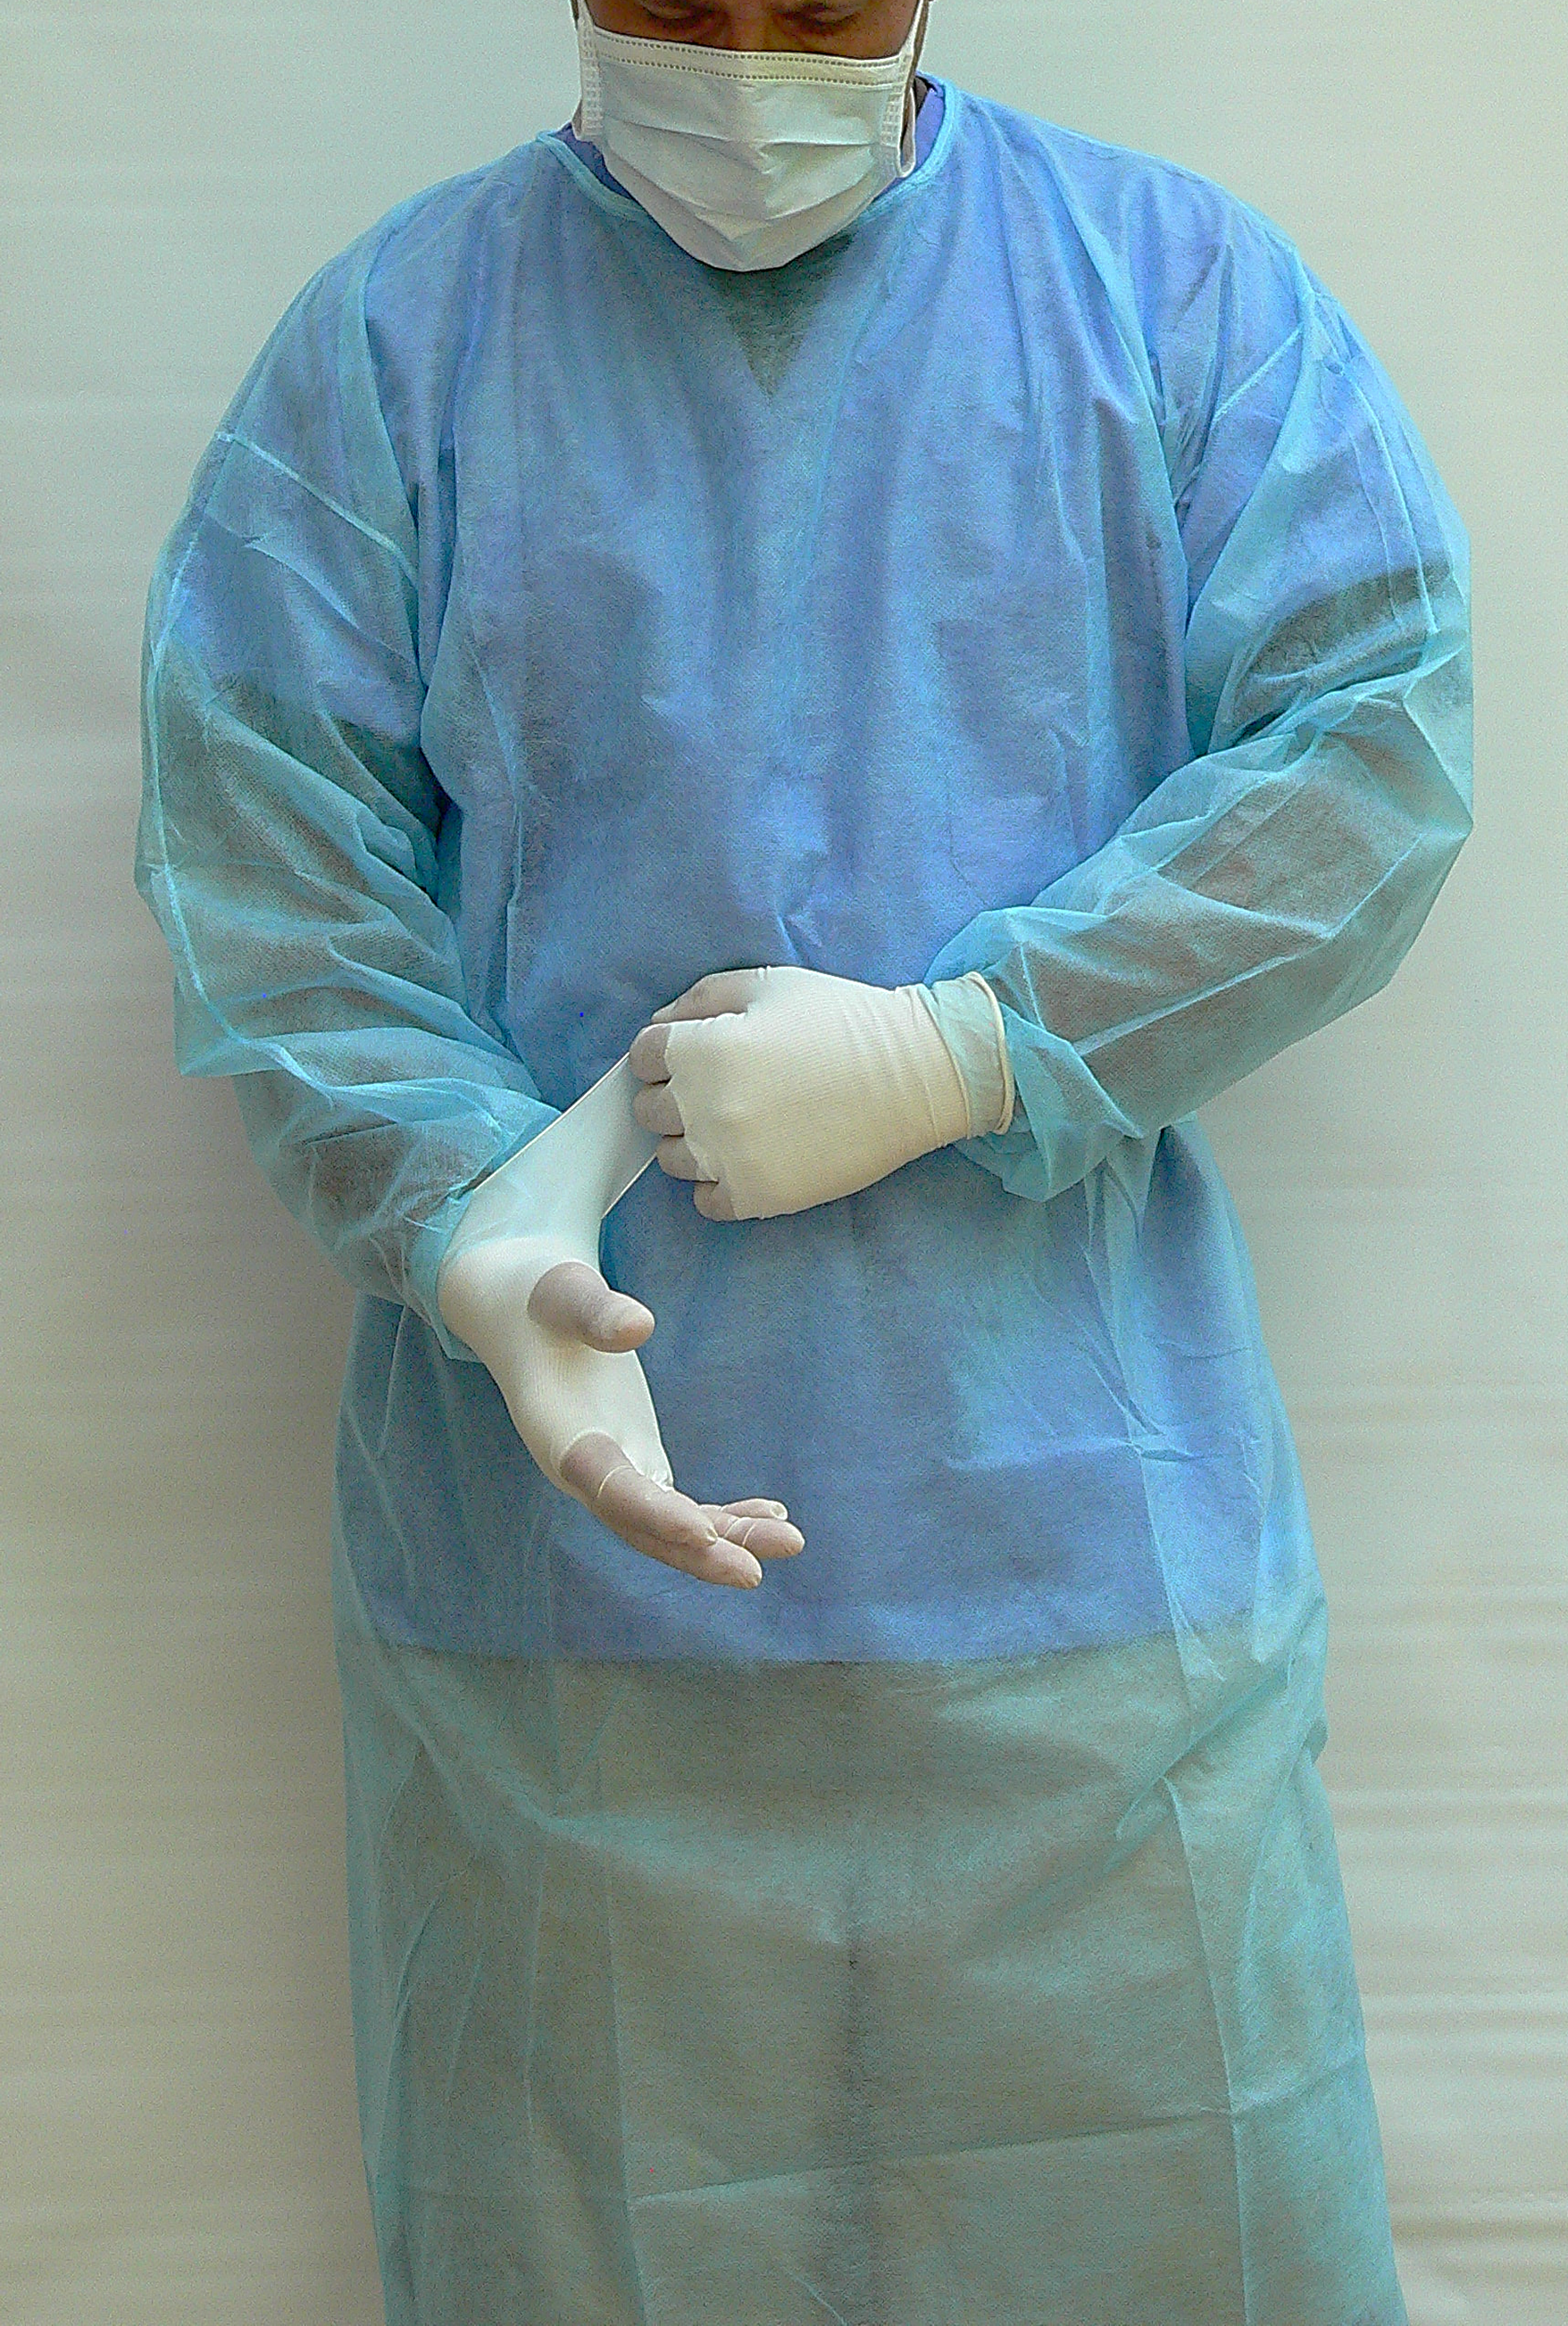 Disposable Blue Fluid-Resistant Polypropylene  Isolation Cover Gowns w/ Elastic Cuffs